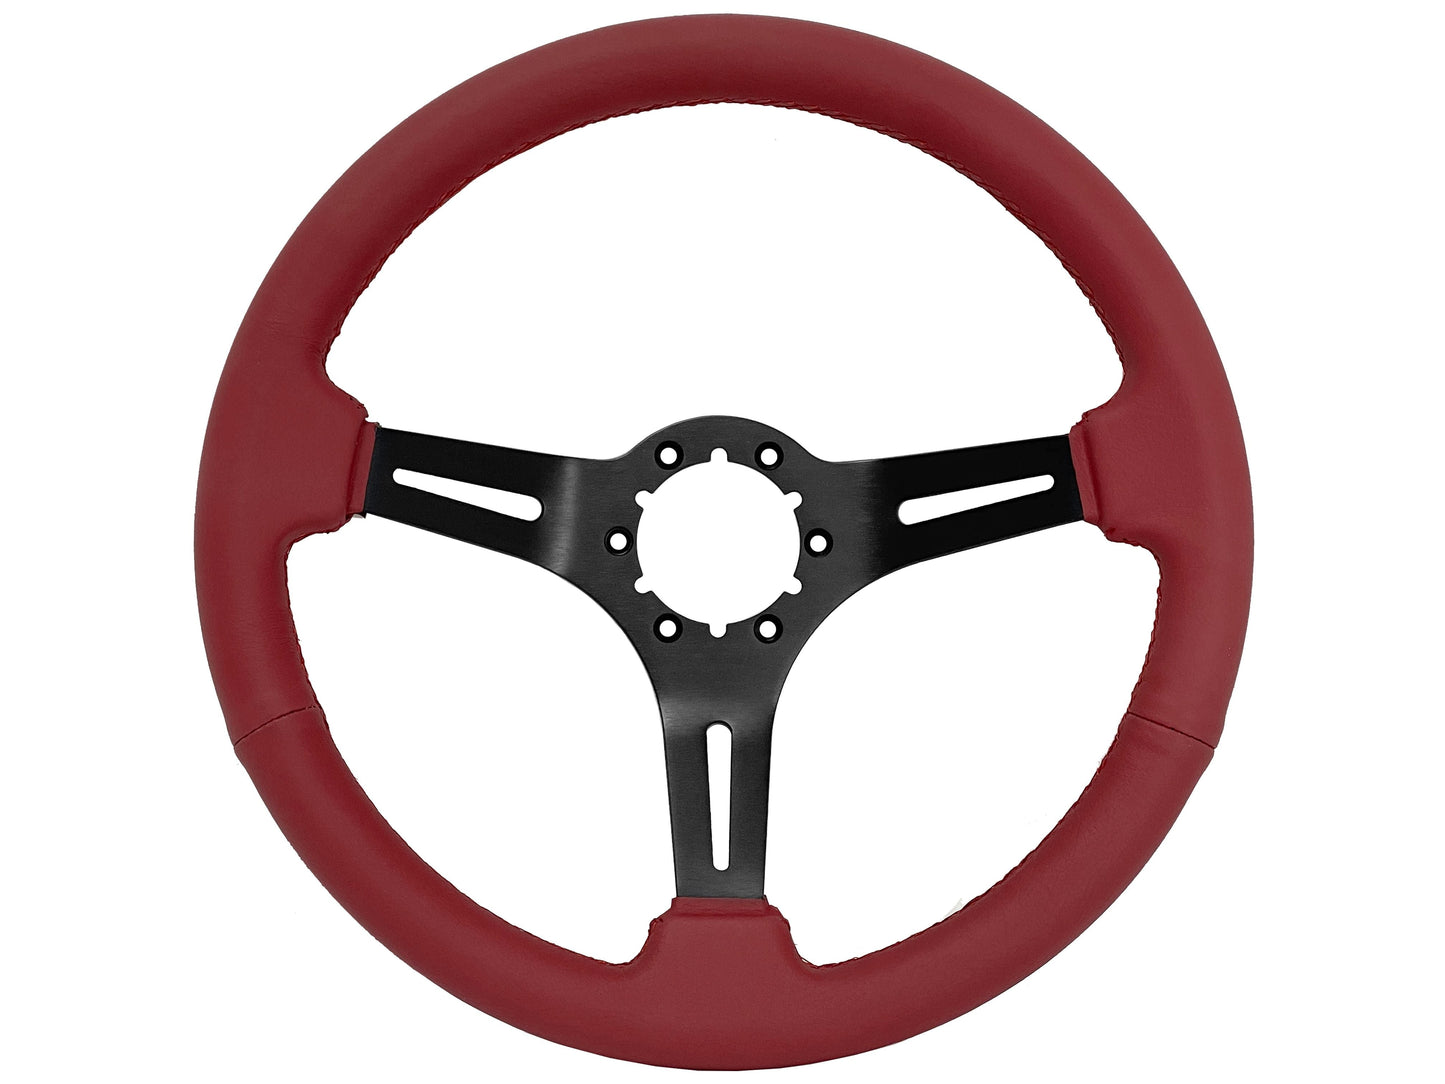 1975-77 Ford Bronco Steering Wheel Kit | Red Leather | ST3060RED